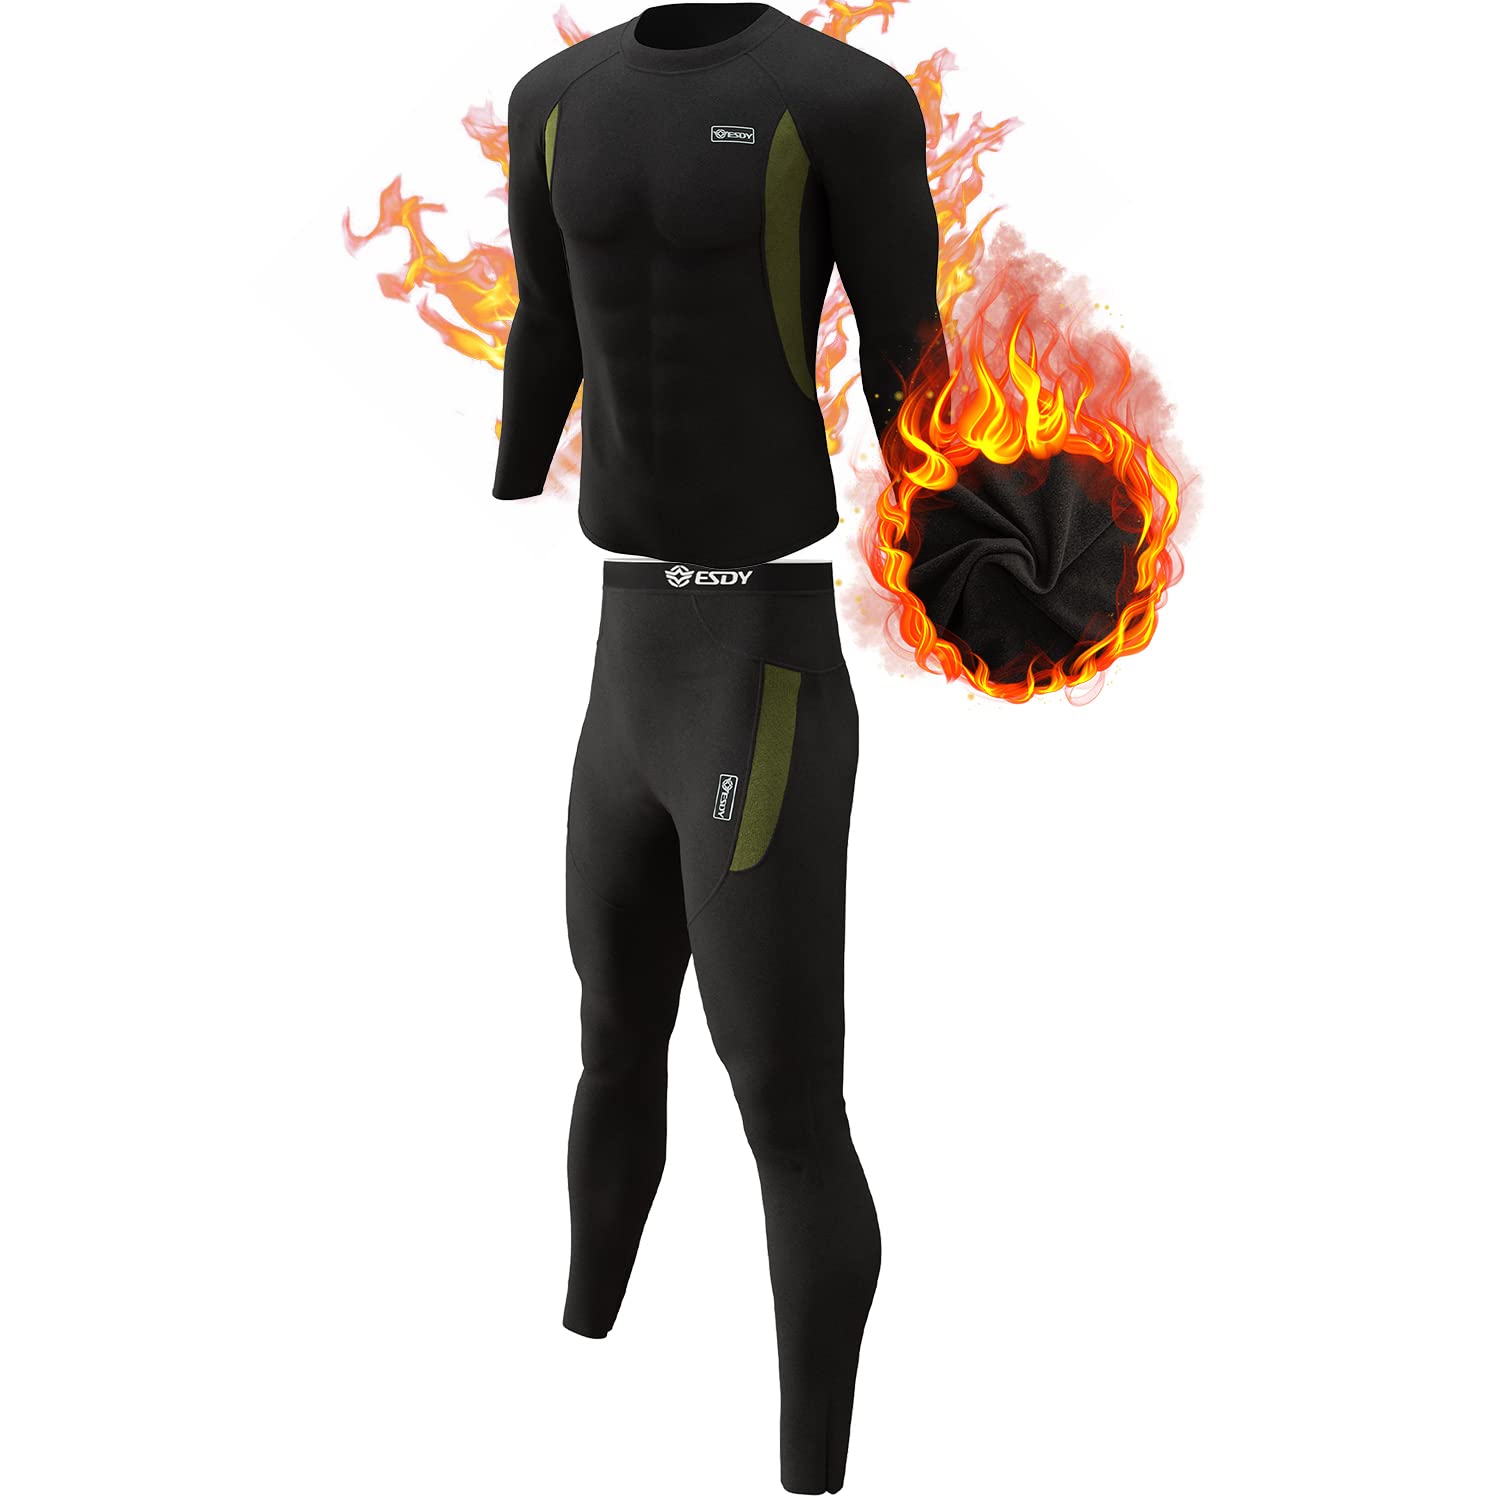 CL Thermal Underwear Long Johns Set Mens Winter Hunting Gear Sport Base Layer Bottom Top XS-4XL